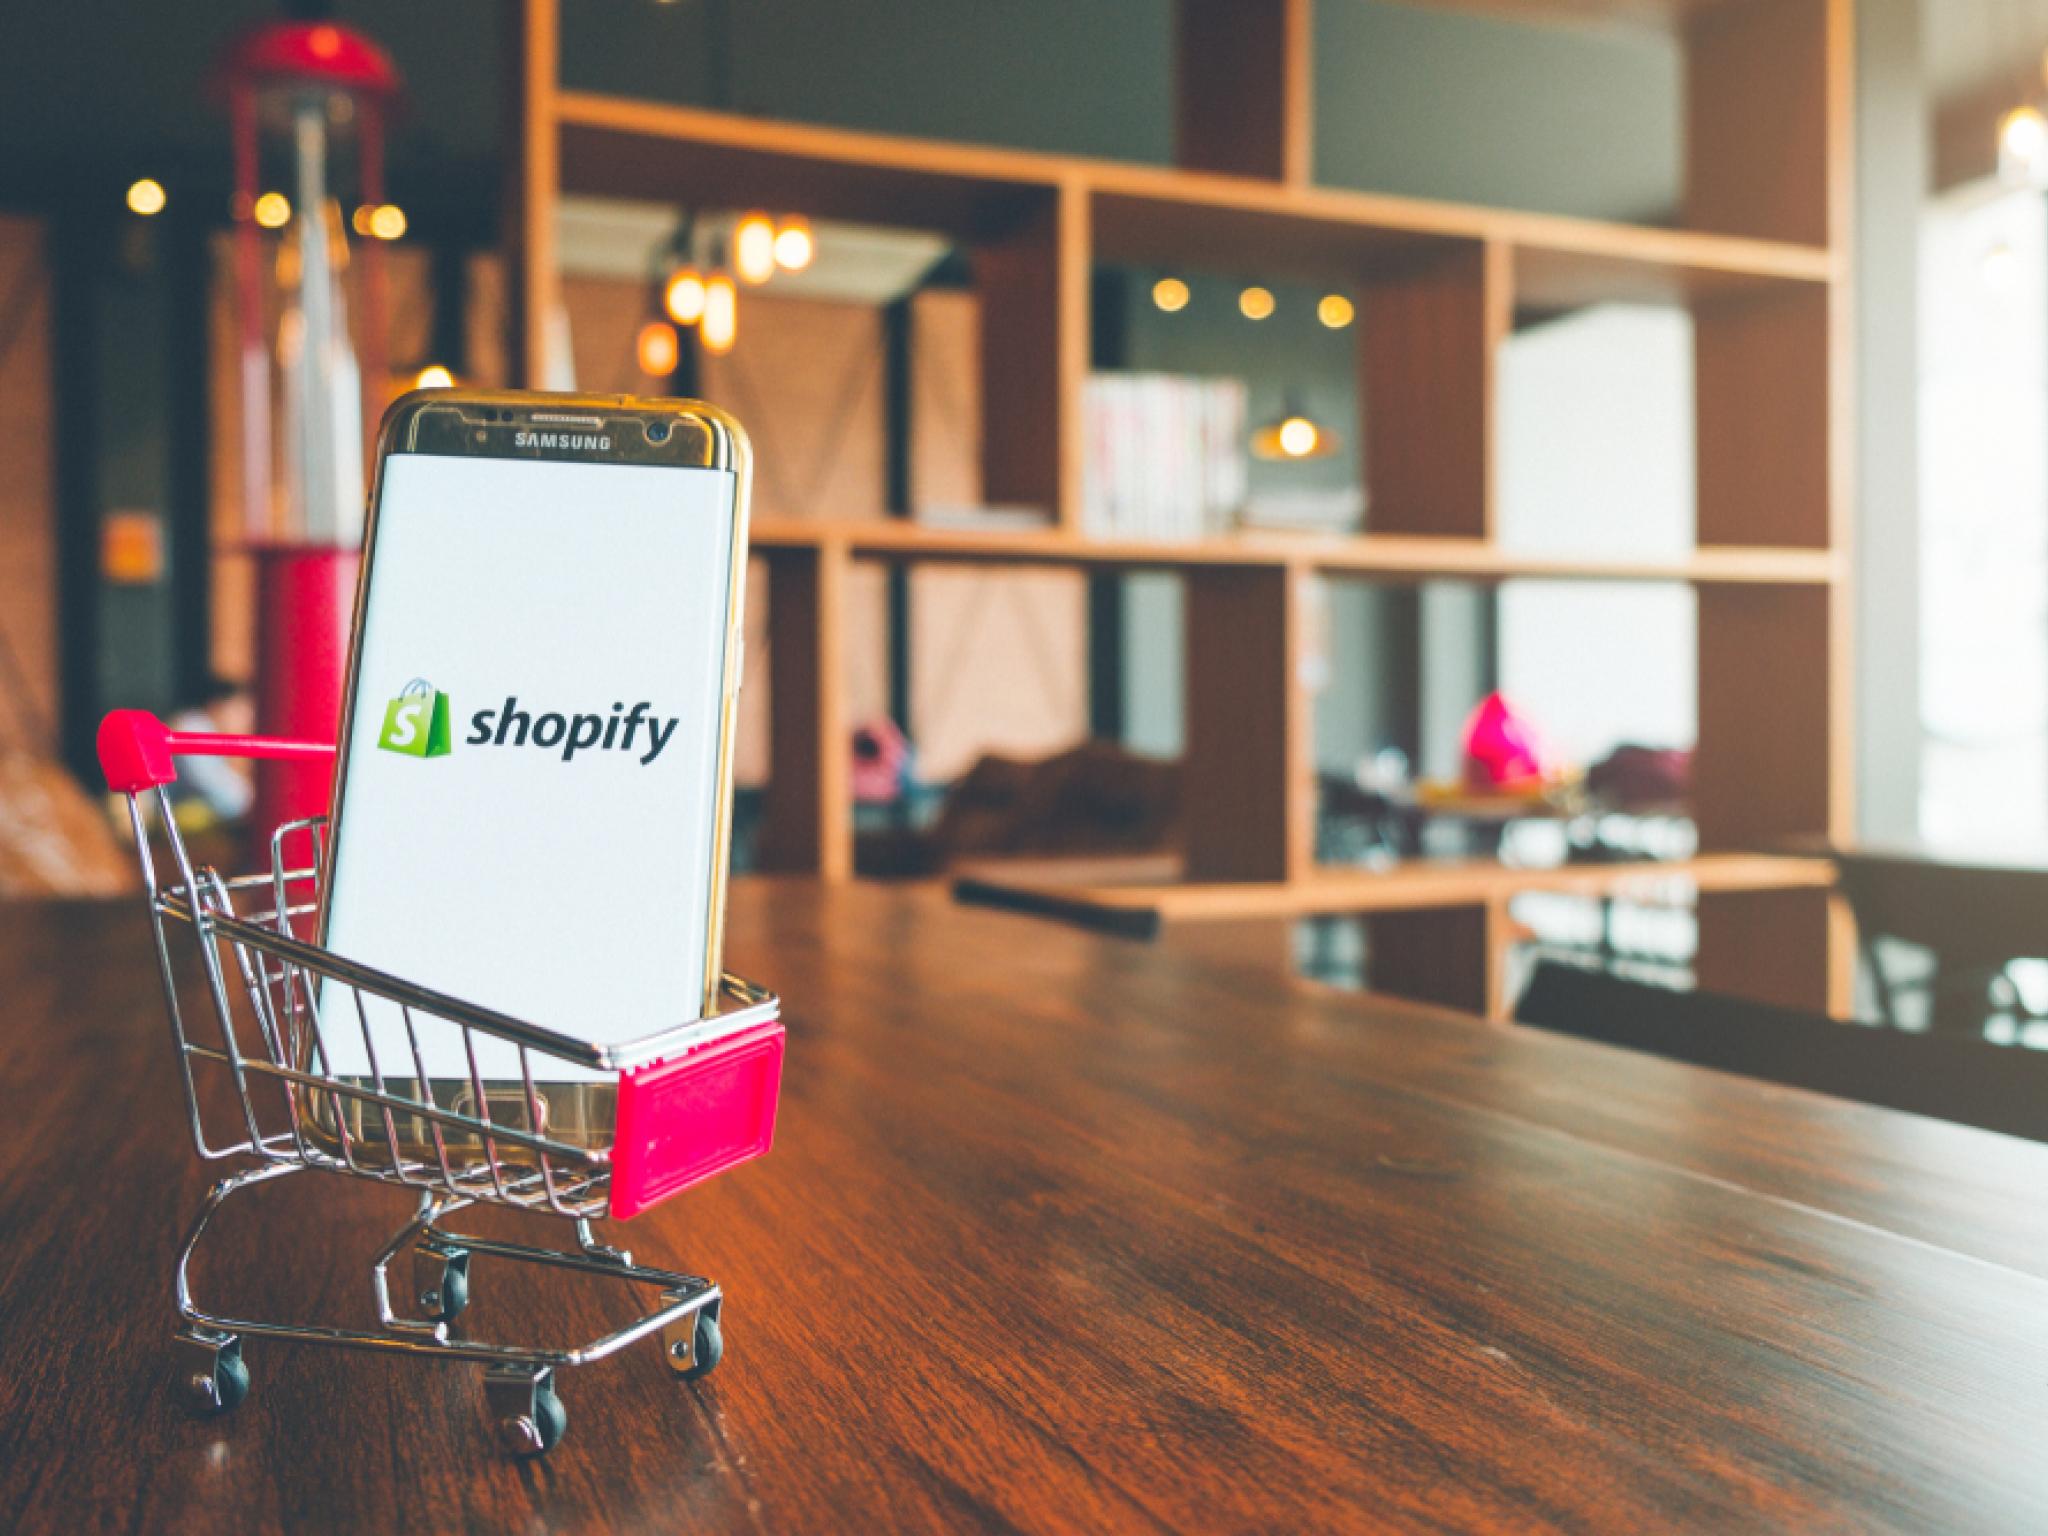  whats-going-on-with-shopify-stock-tuesday 